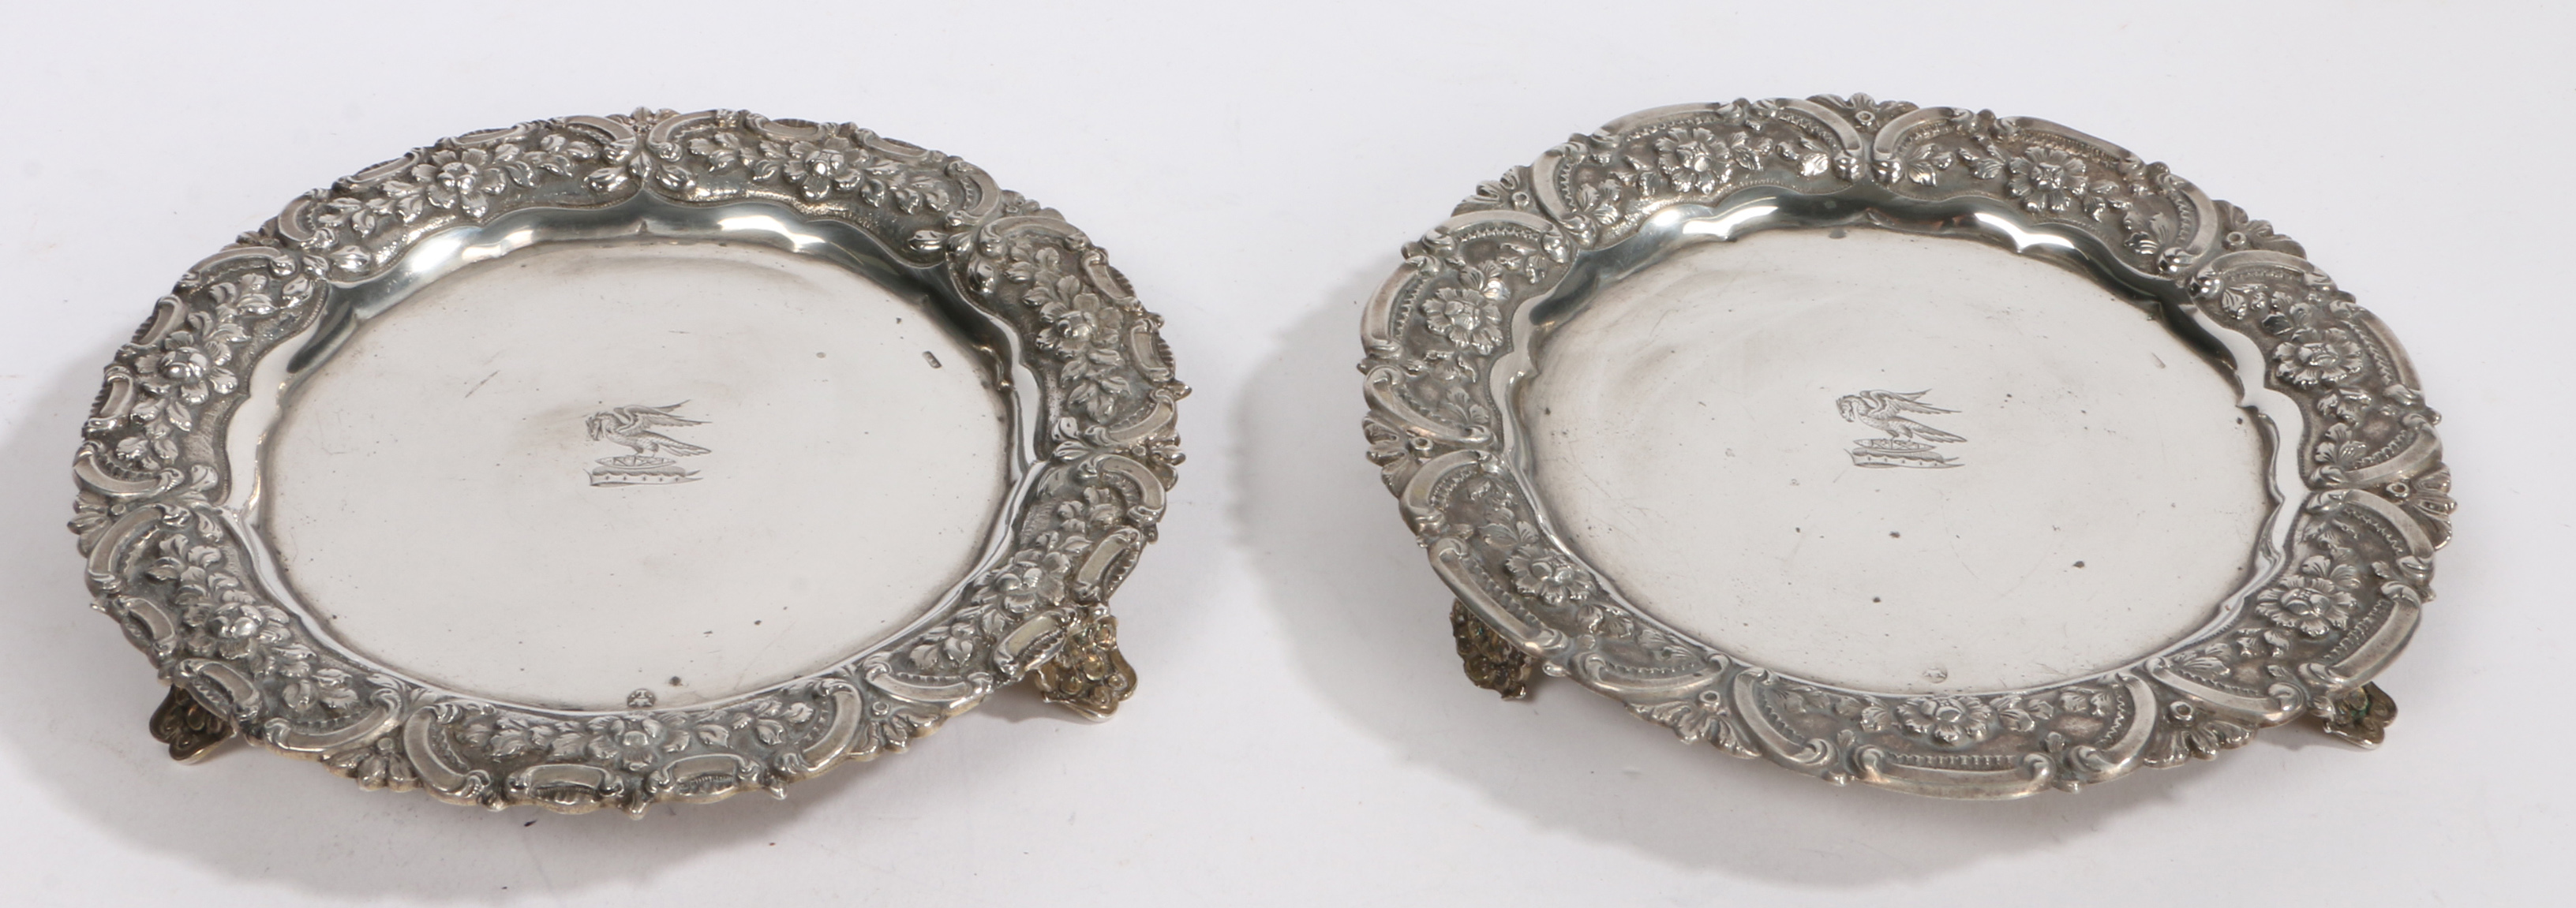 A pair of Portuguese silver dishes, Lisbon, maker S&V, with central crest depicting a bird of